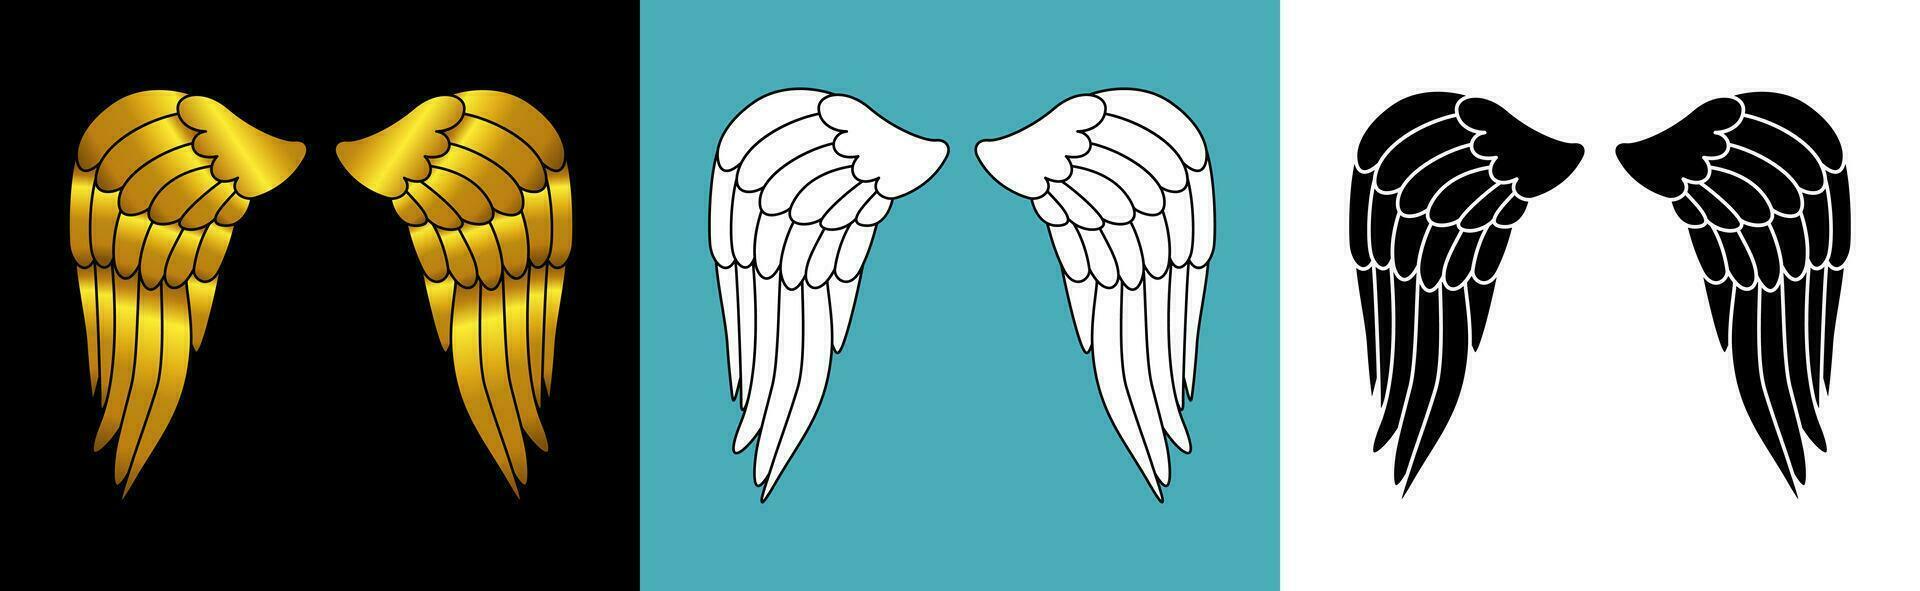 Hand drawn bird or angel wings with different style and color design. Vintage heraldic wings sketch. Contoured doodle wings vector